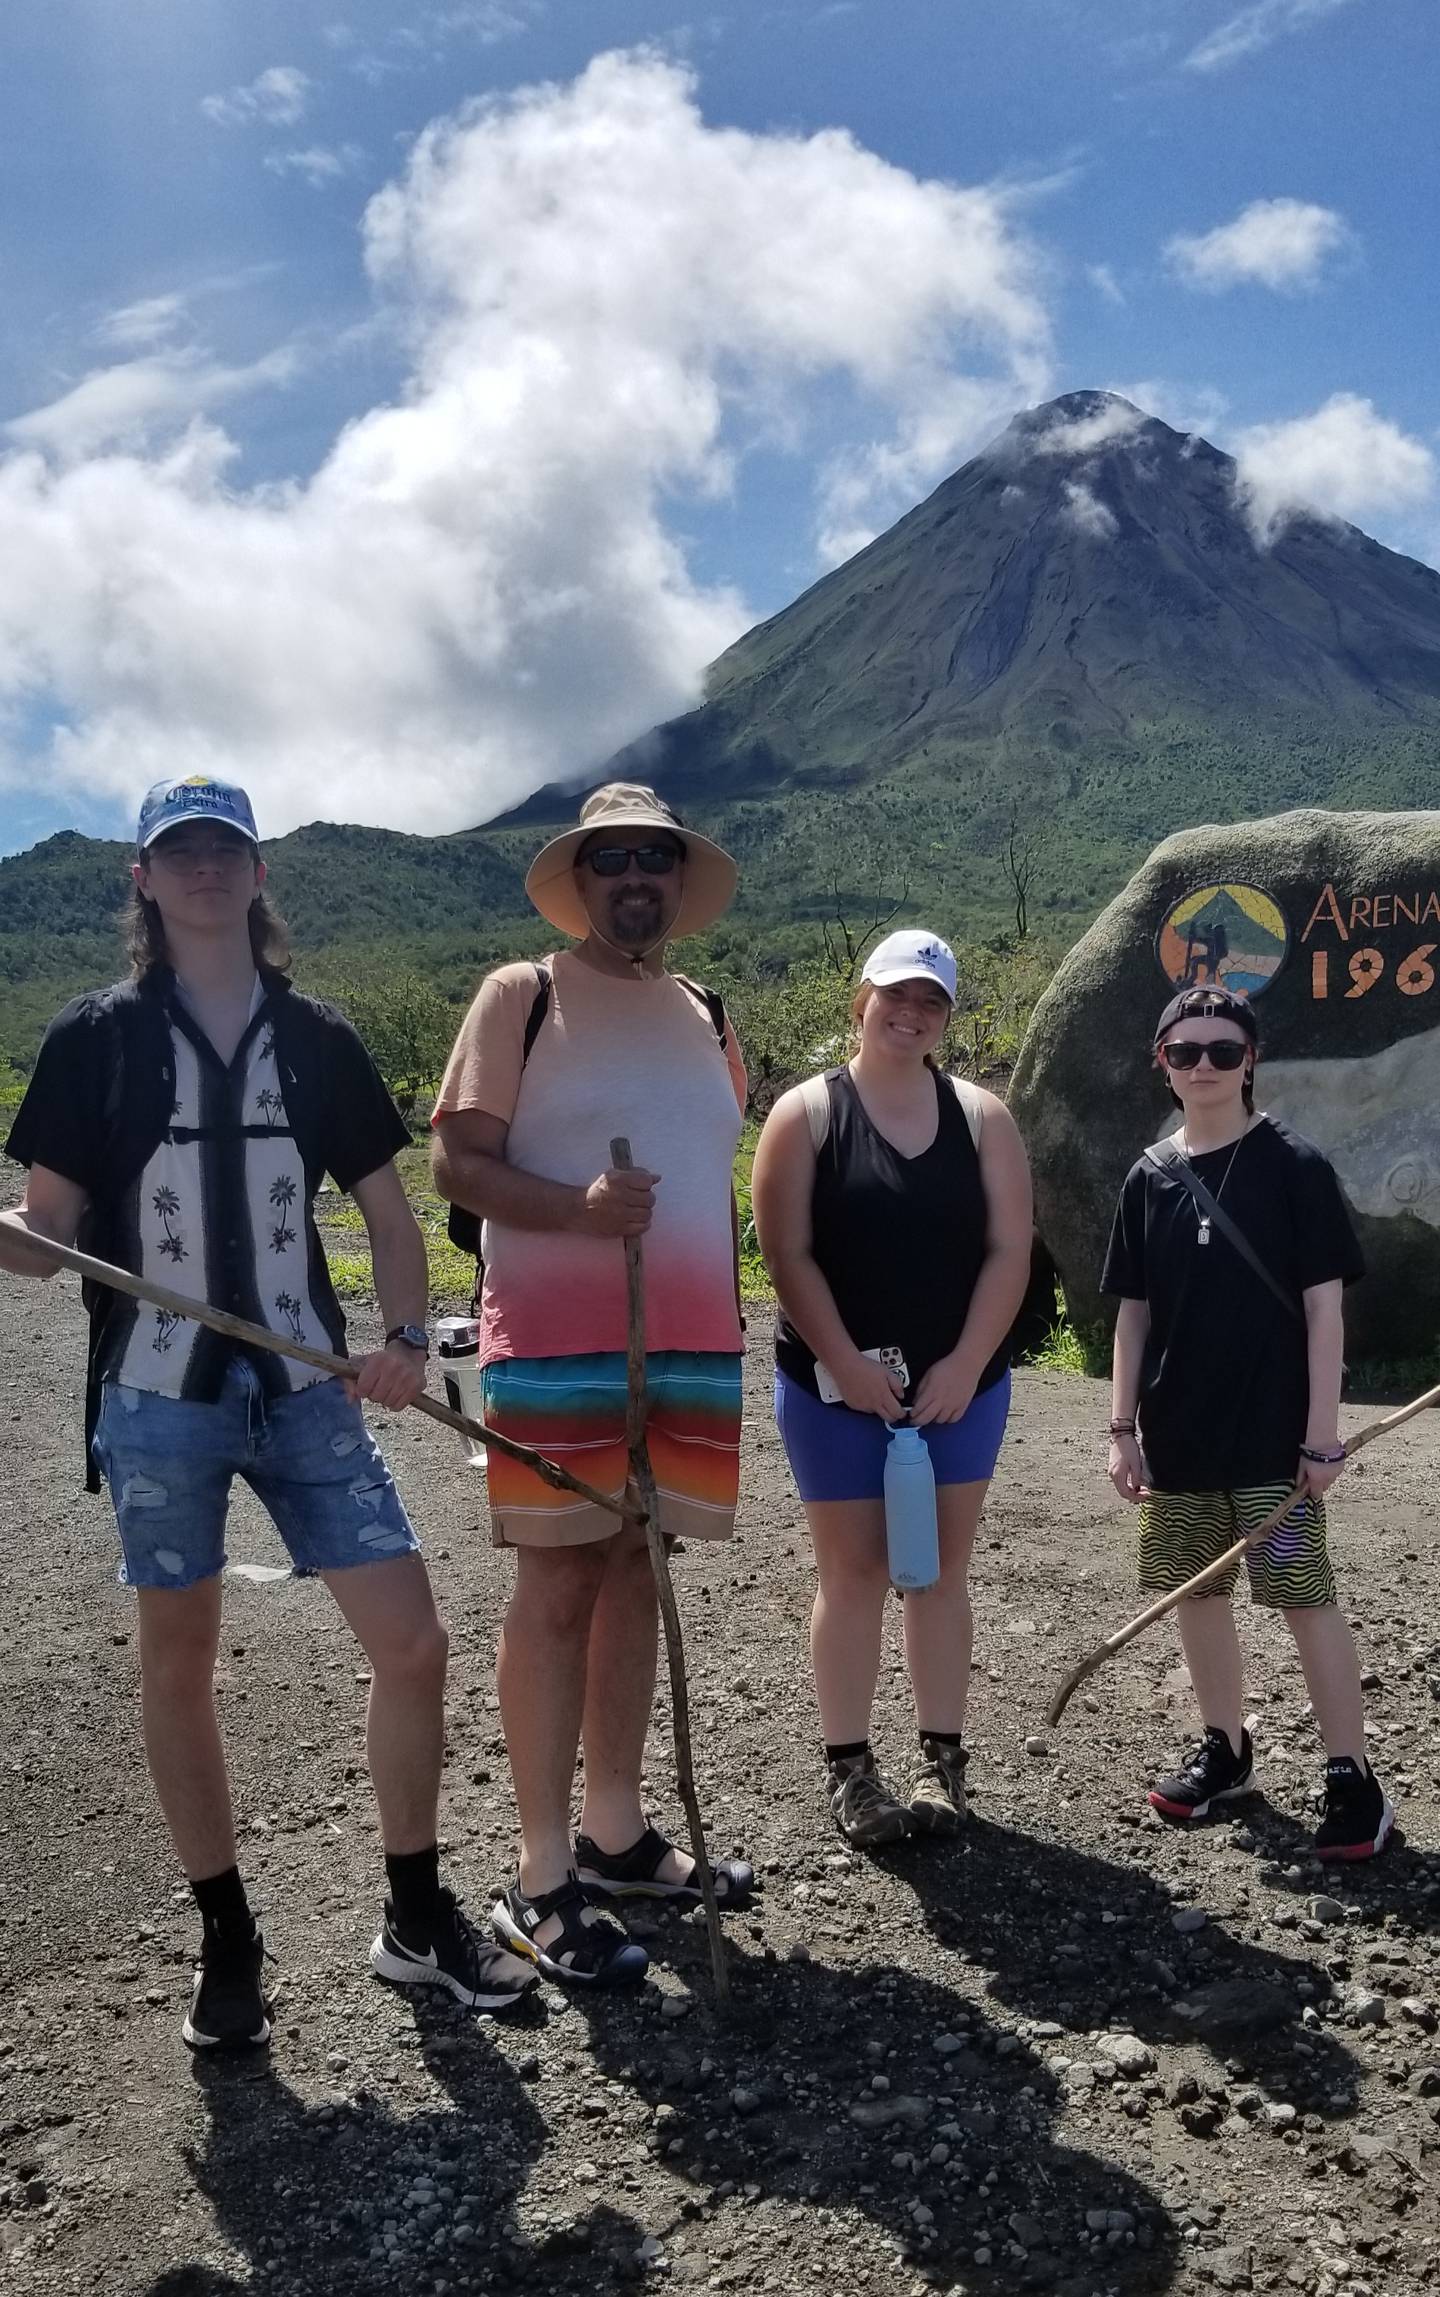 The group from Hall High School preparing to hike up the base of Arenal Volcano (left to right) Reid Sartain, Robert Malerk, Hope Whightsil and Lucas Gruber.